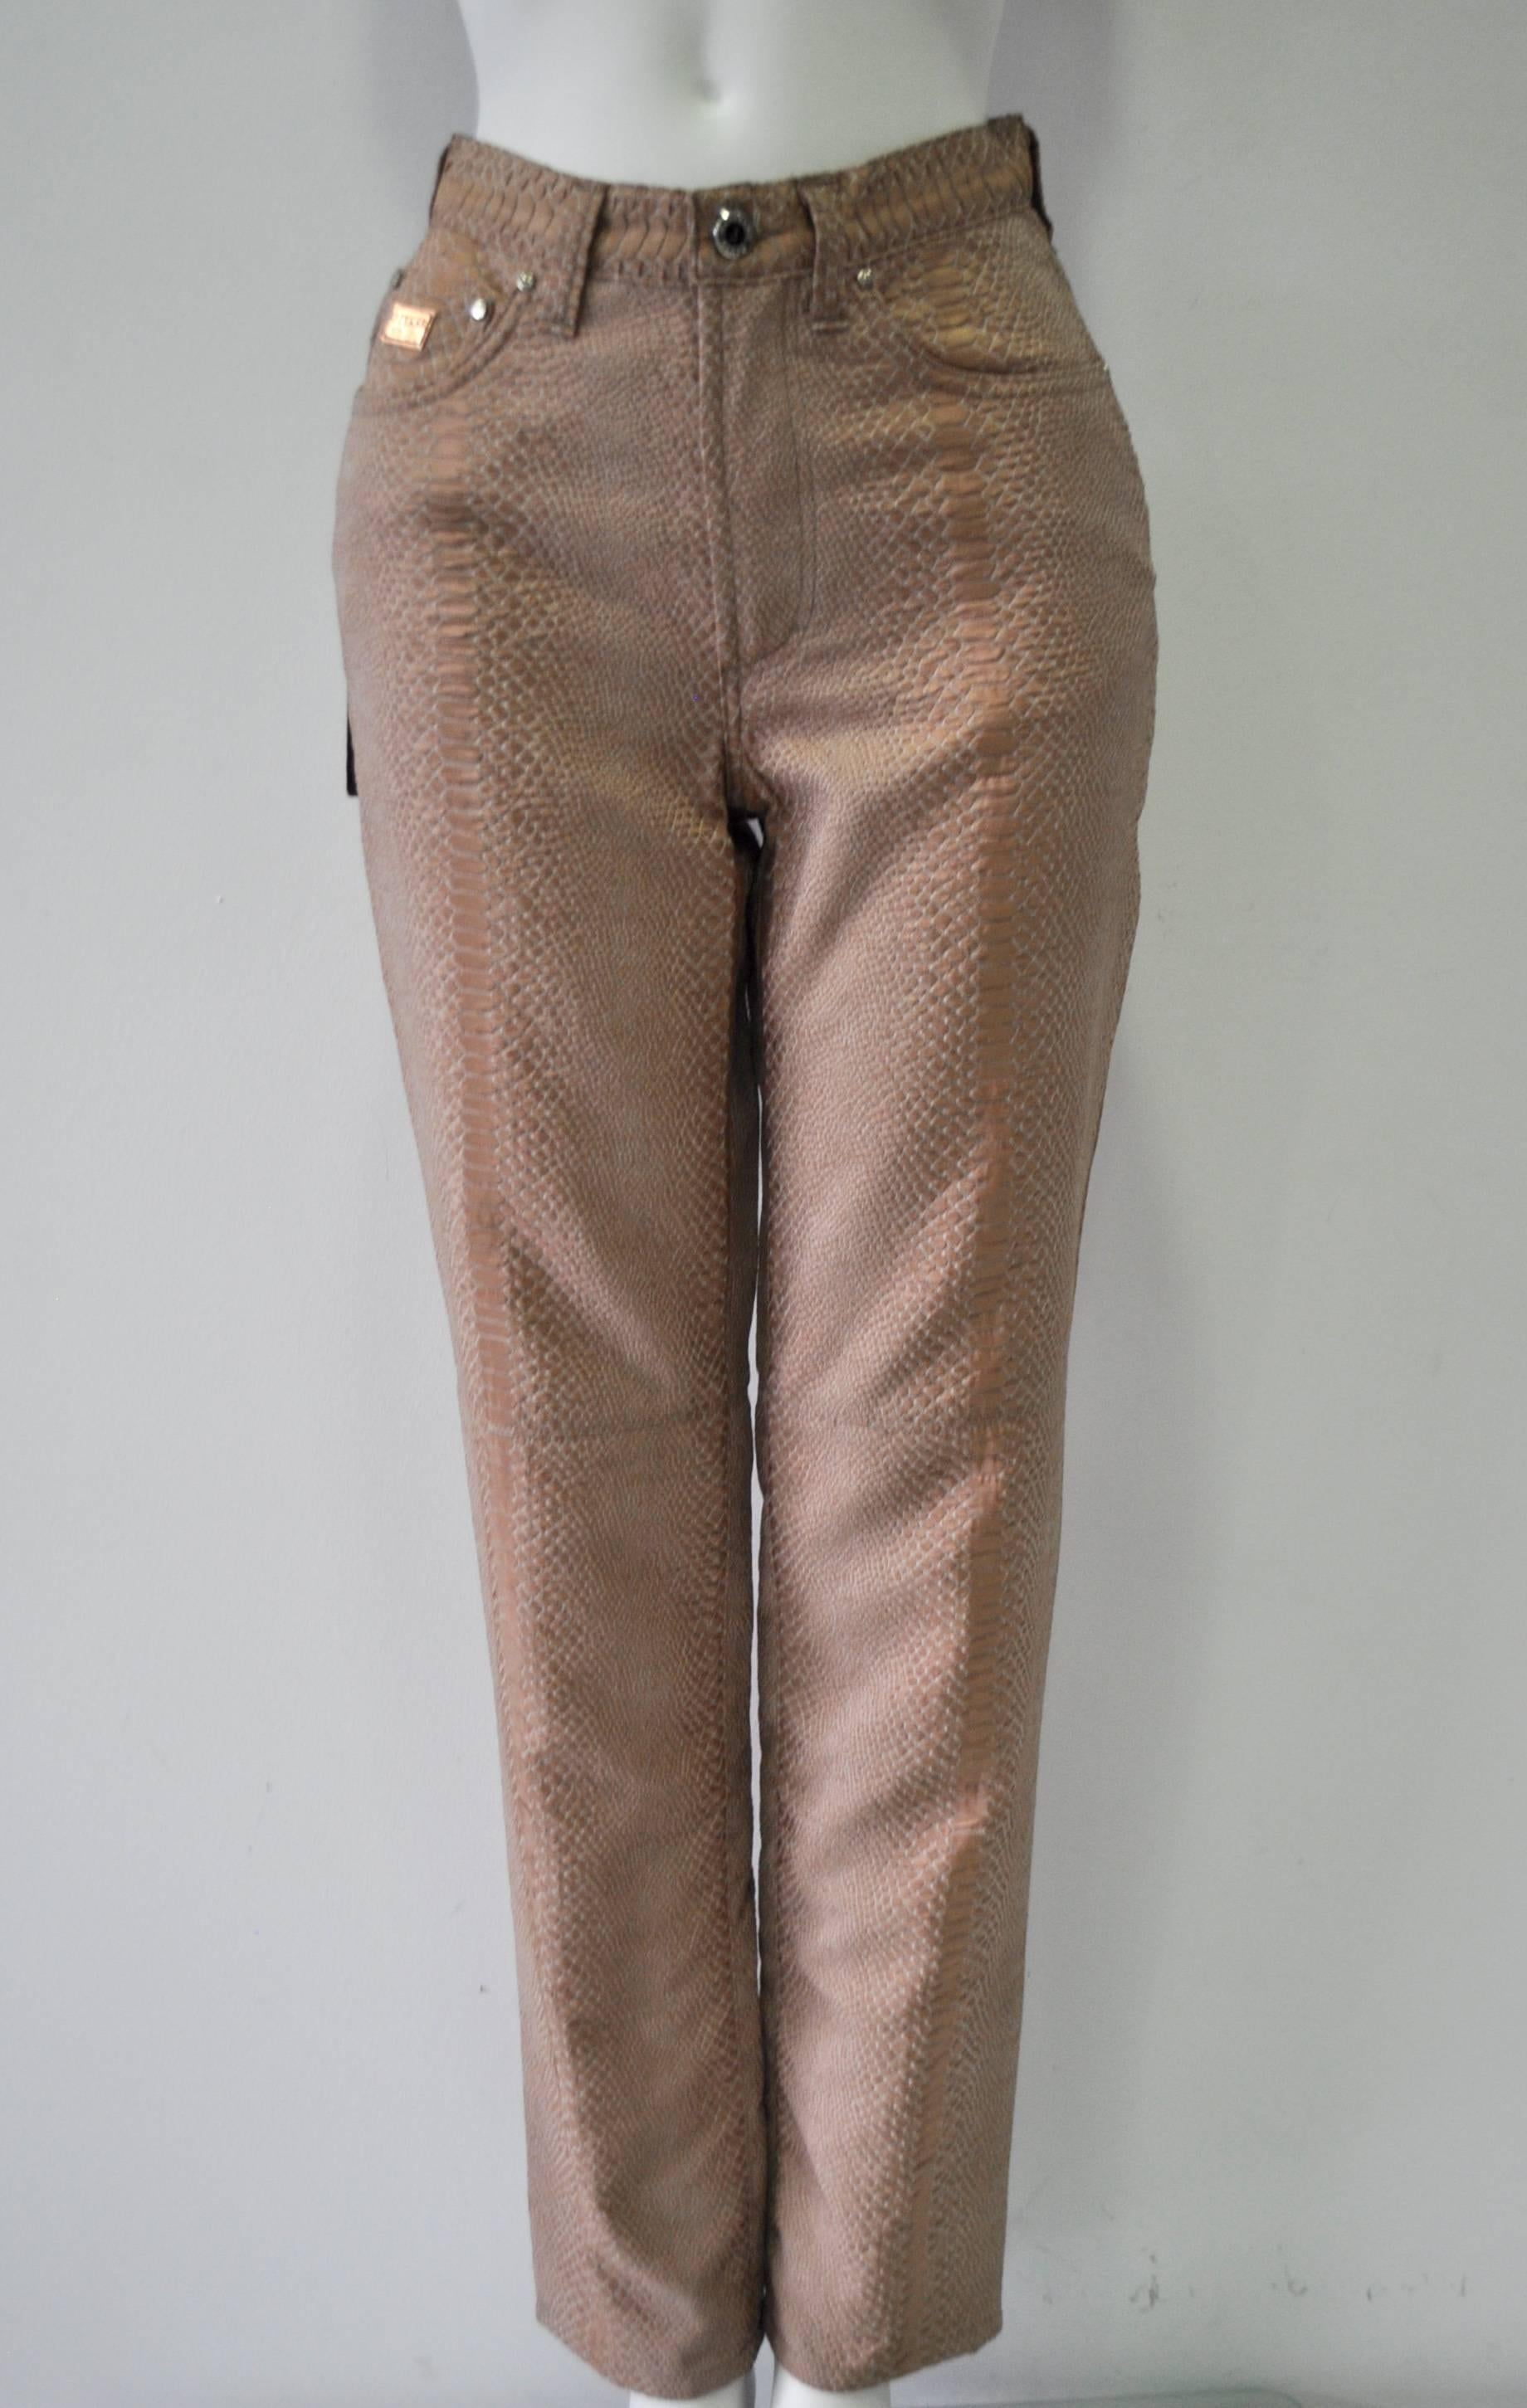 Very Original Gianfranco Ferre Stamped Mod 40011 Lustrous Python Print High Waisted Jeans